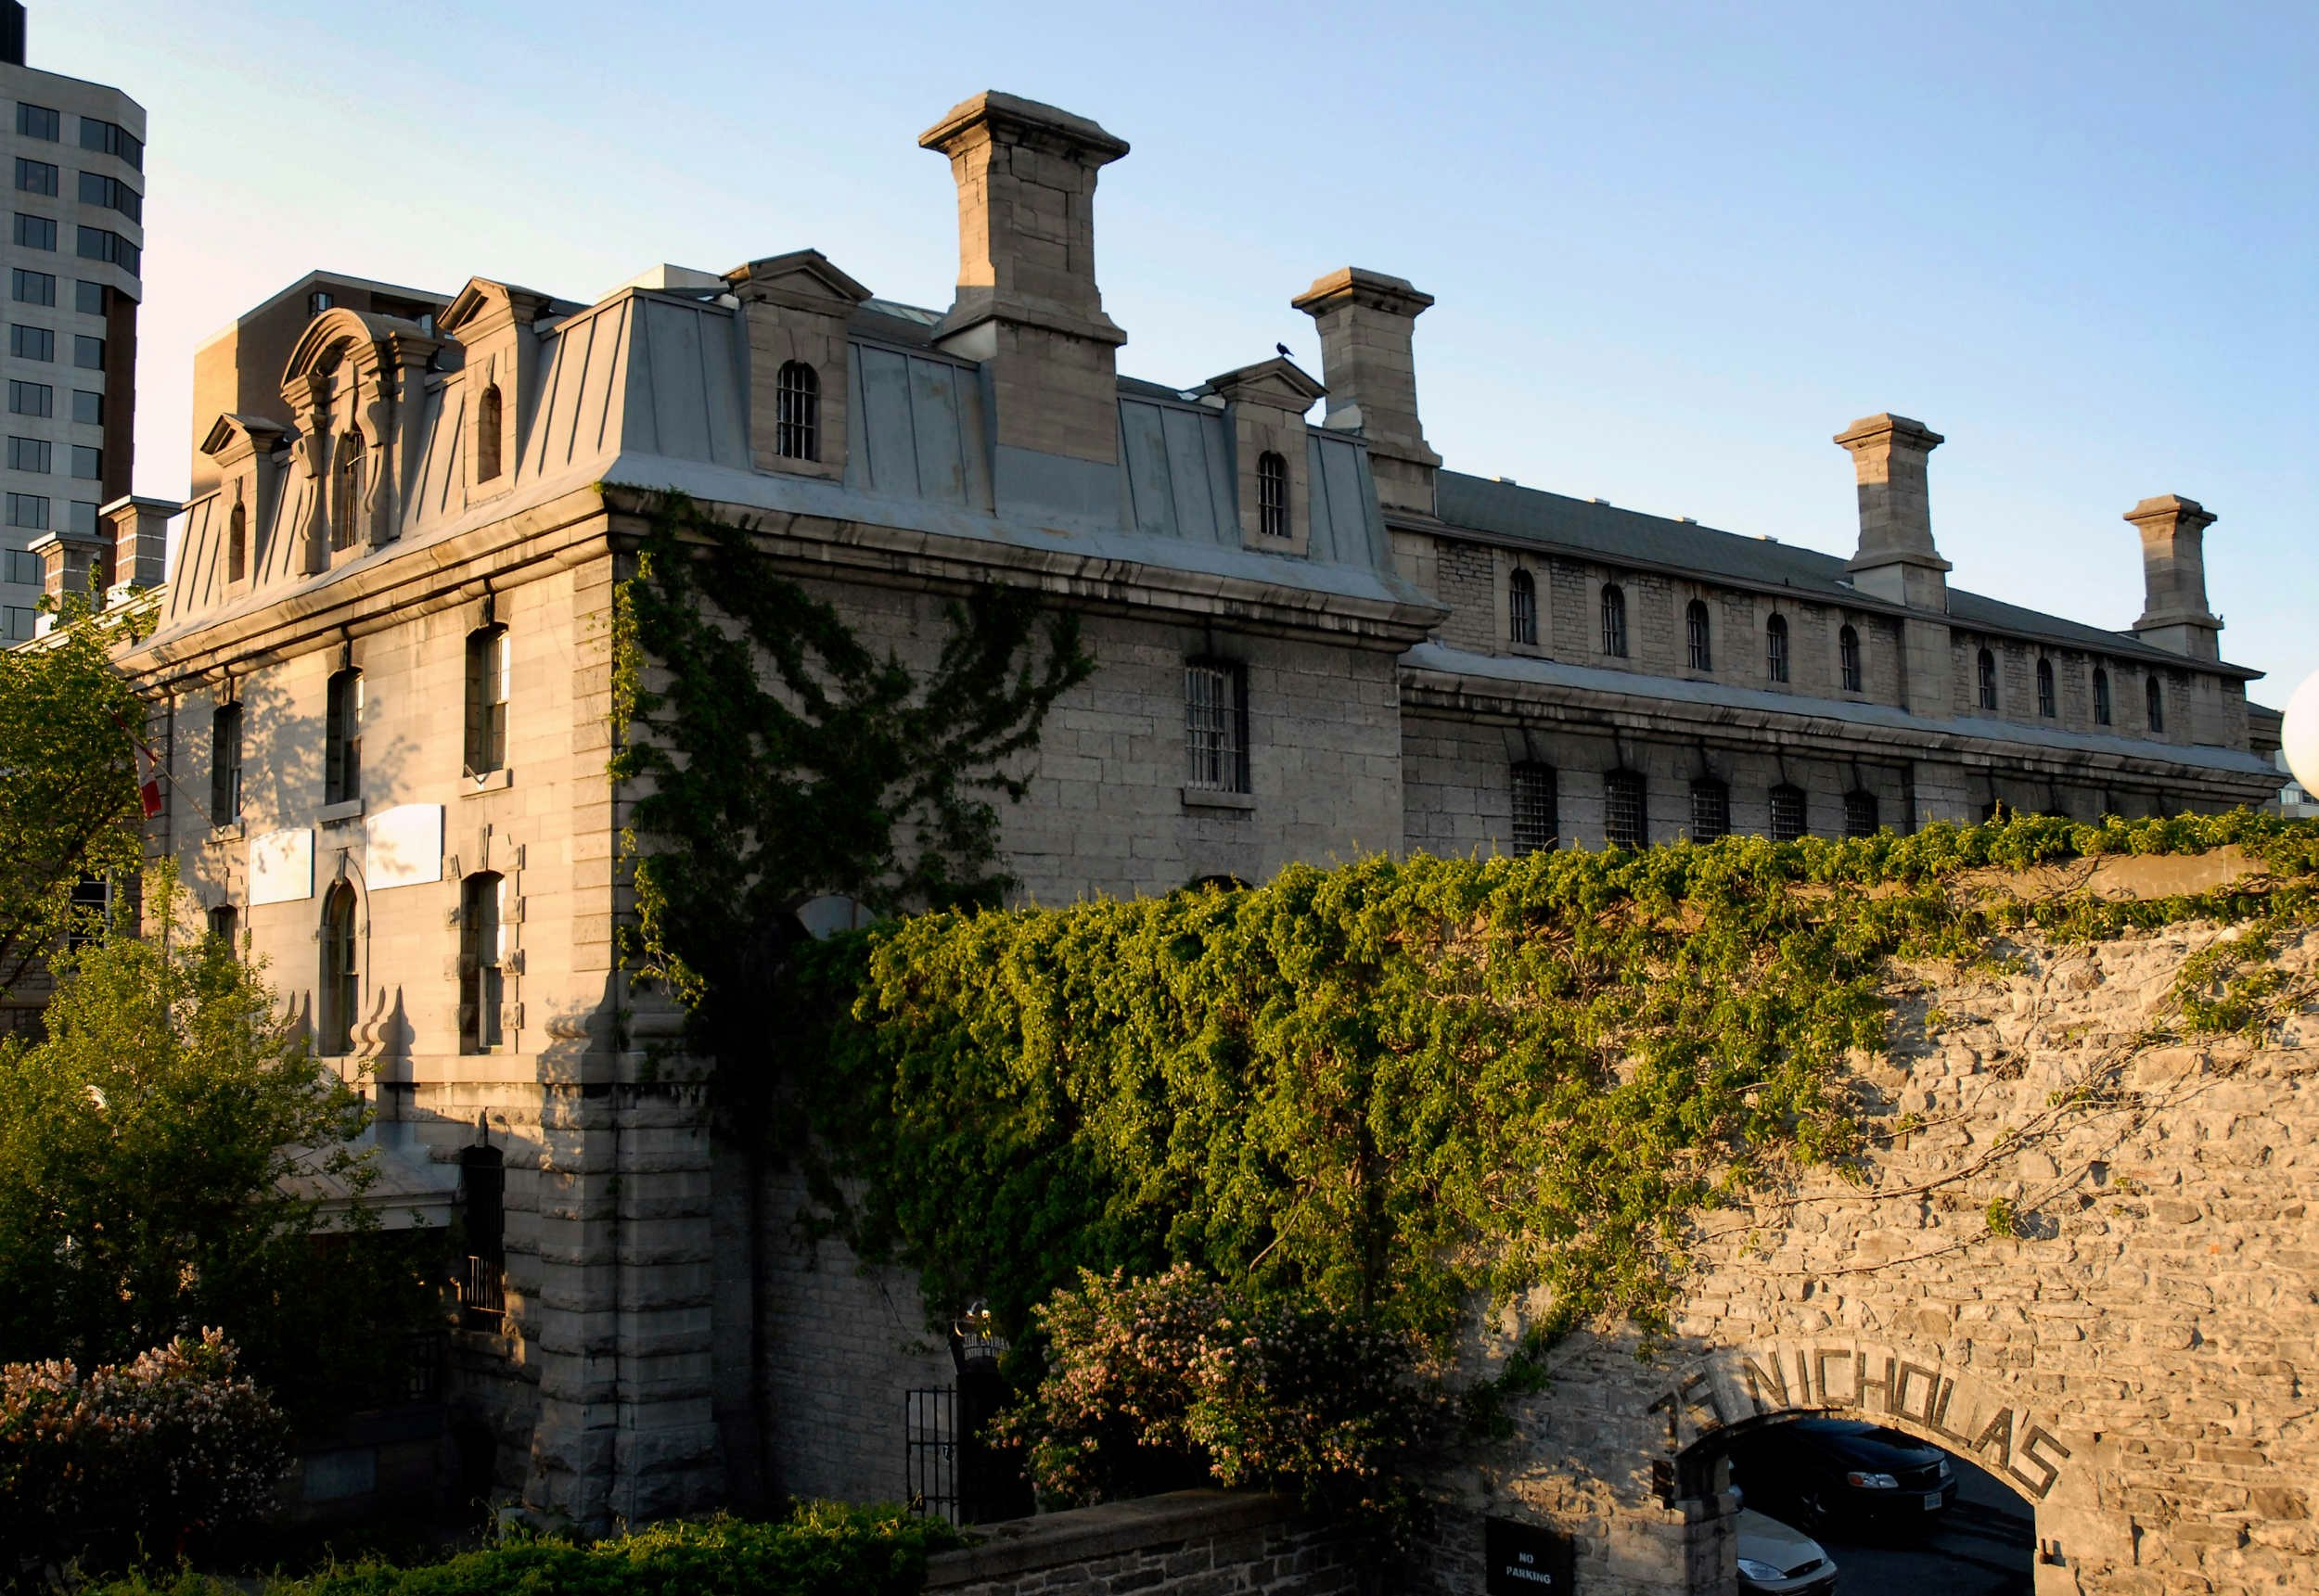 The exterior of a former jail in Ottawa, Ontario. The prison has been converted into a hostel.